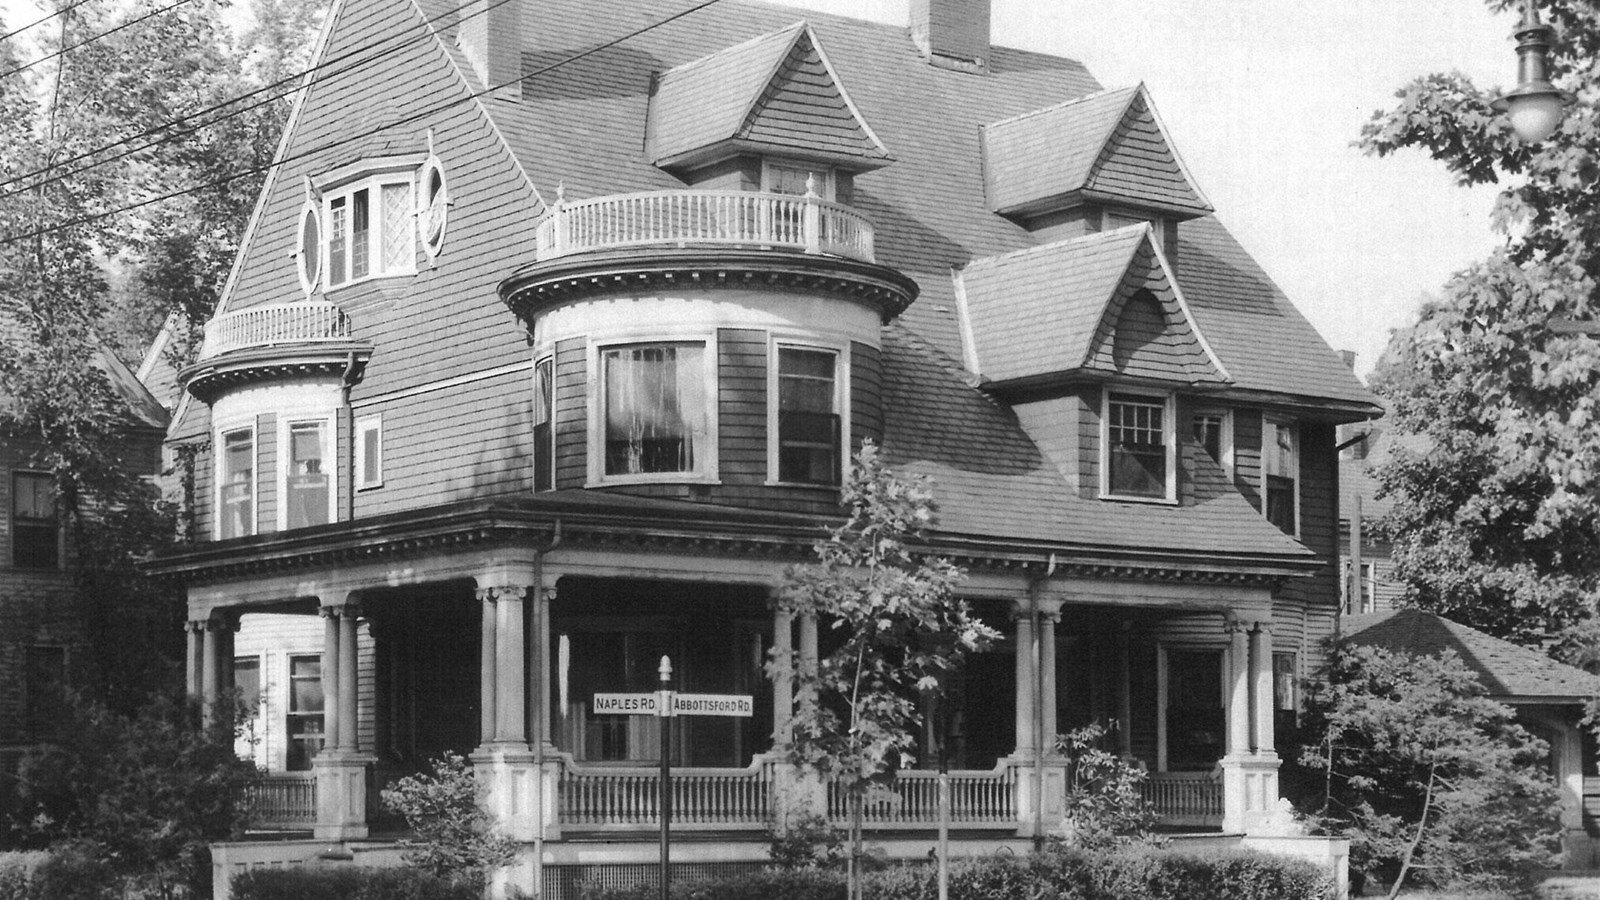 Black and white photograph of three story house with large porch, rounded windows, and dormers